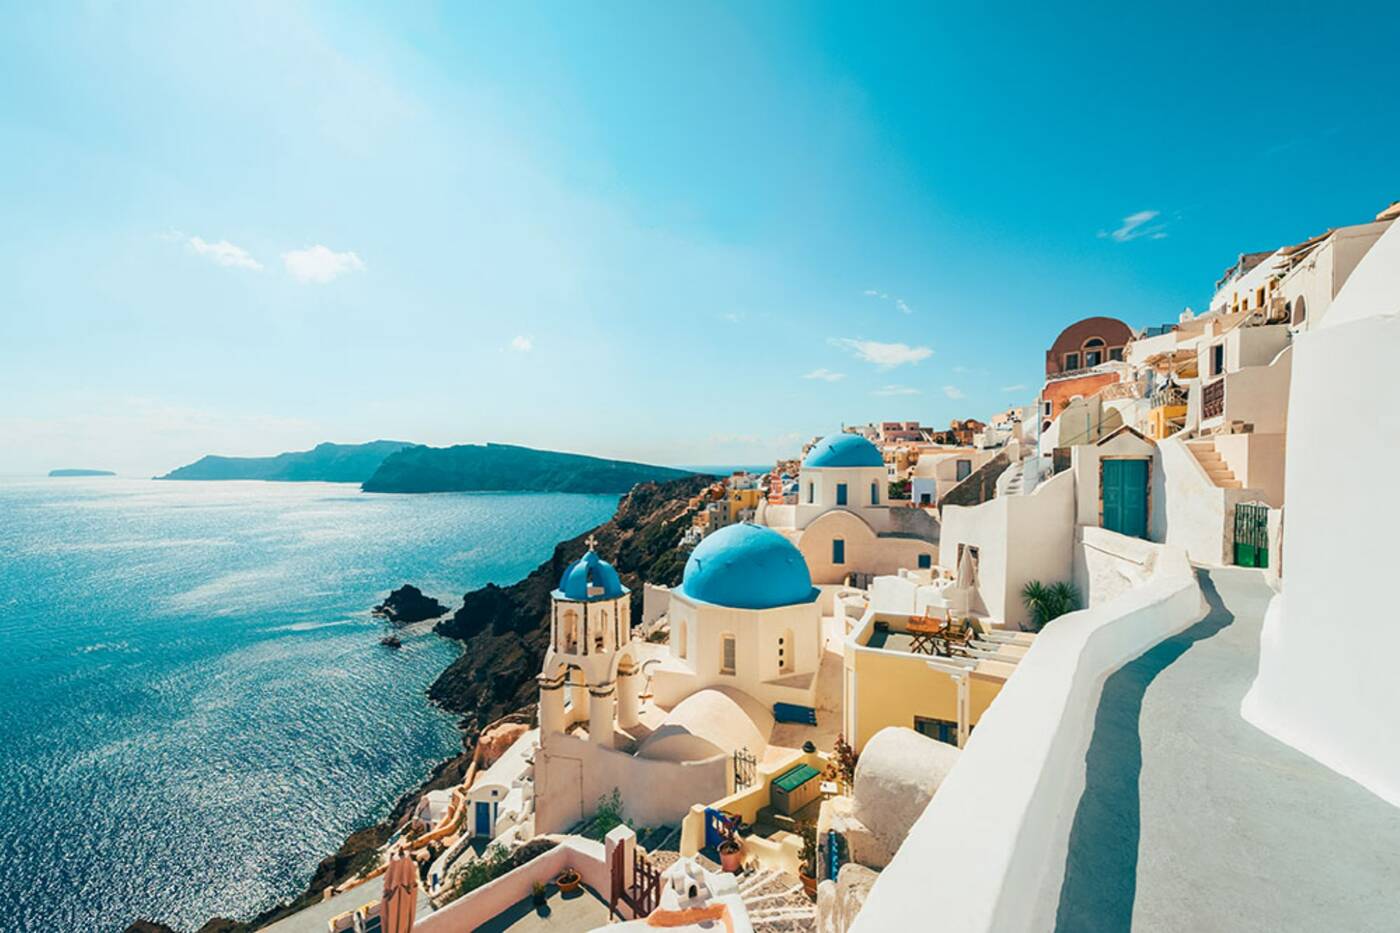 Here’s a stress-free way to plan and book your dream European vacation